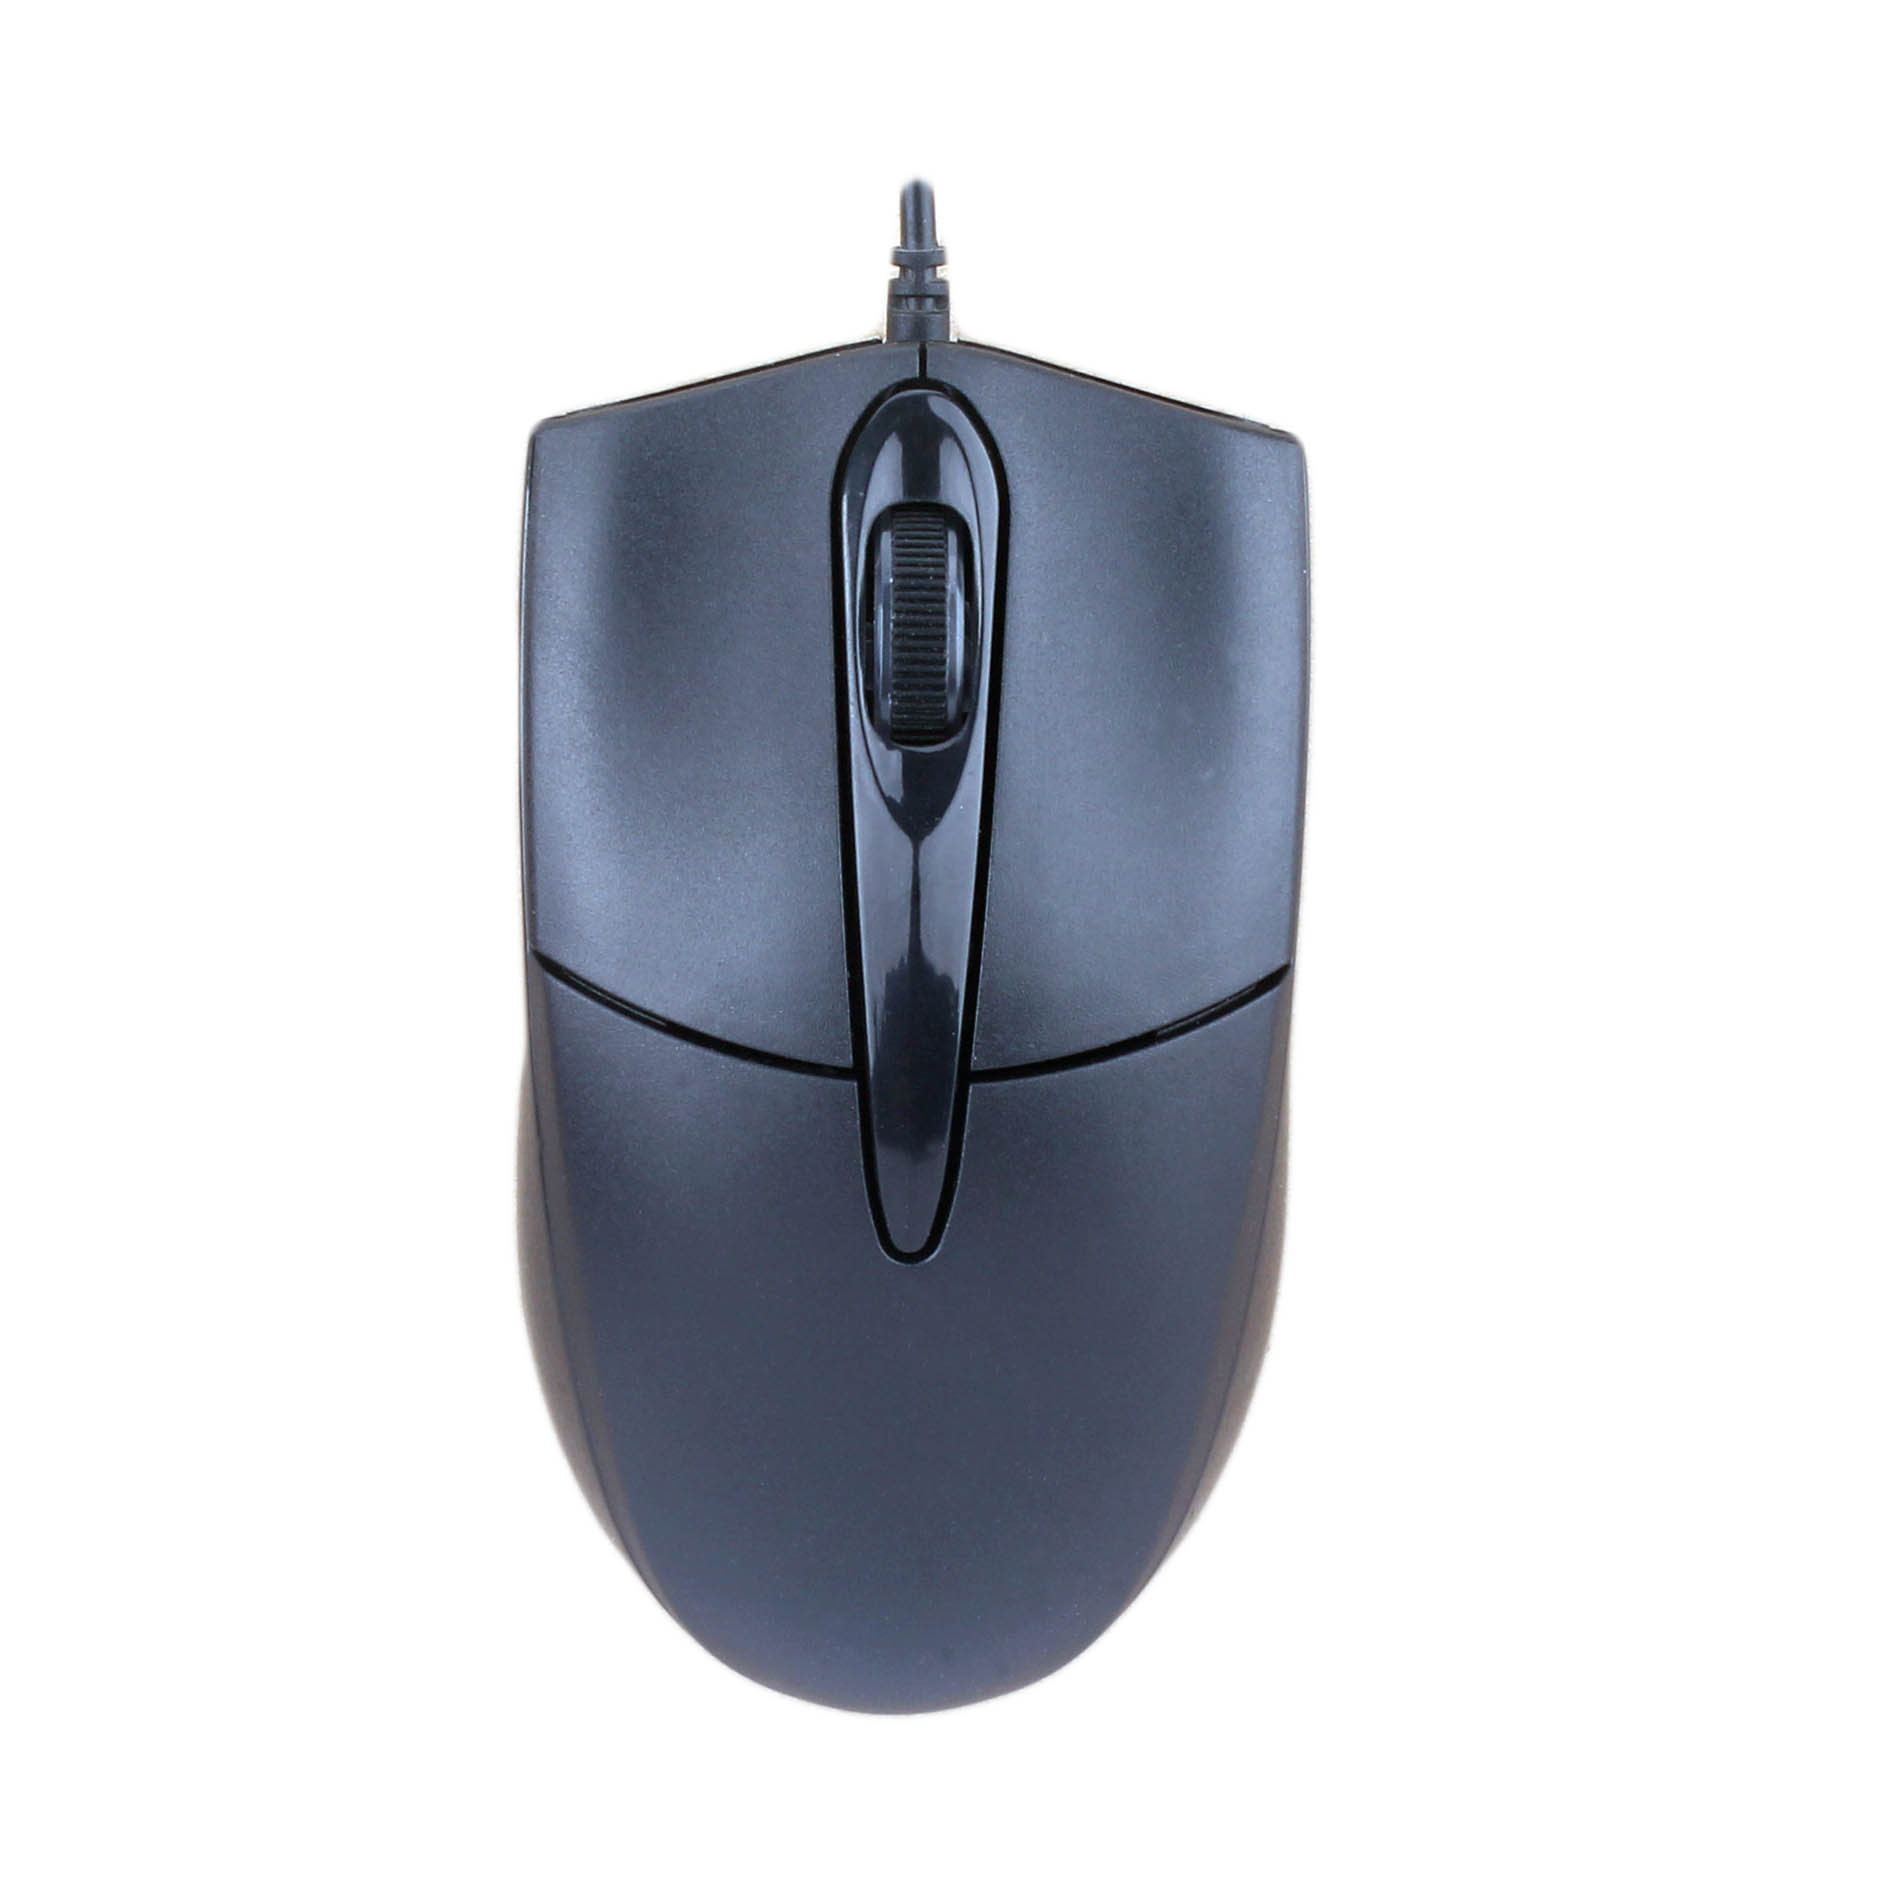 USB Mouse Big Size,Classic Office Design